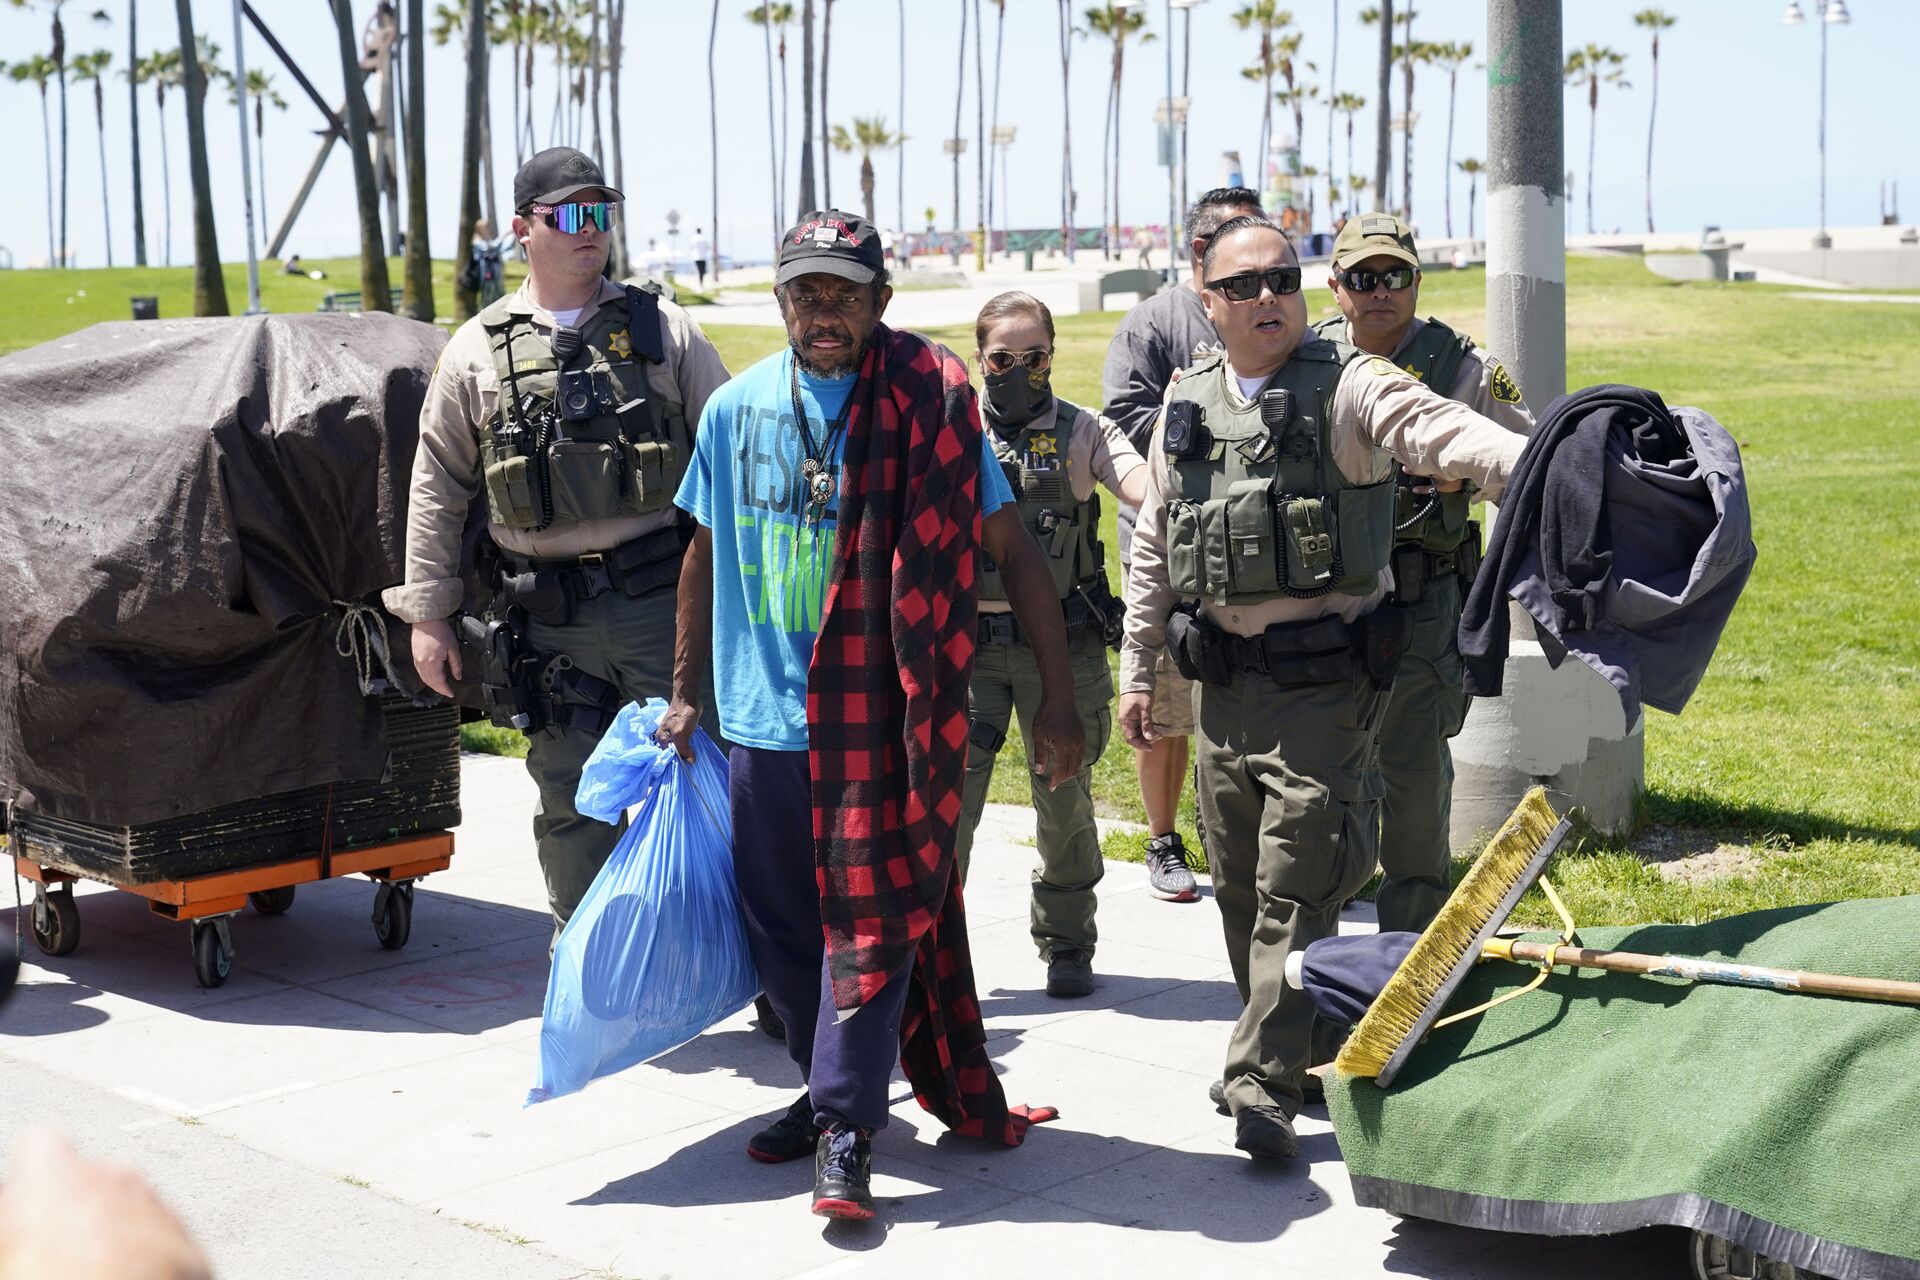 Members of the Los Angeles County Sheriffs Department's HOST, Homeless Outreach Service Team, walk with a homeless man Tuesday, June 8, 2021, in the Venice Beach section of Los Angeles - Sputnik International, 1920, 07.09.2021